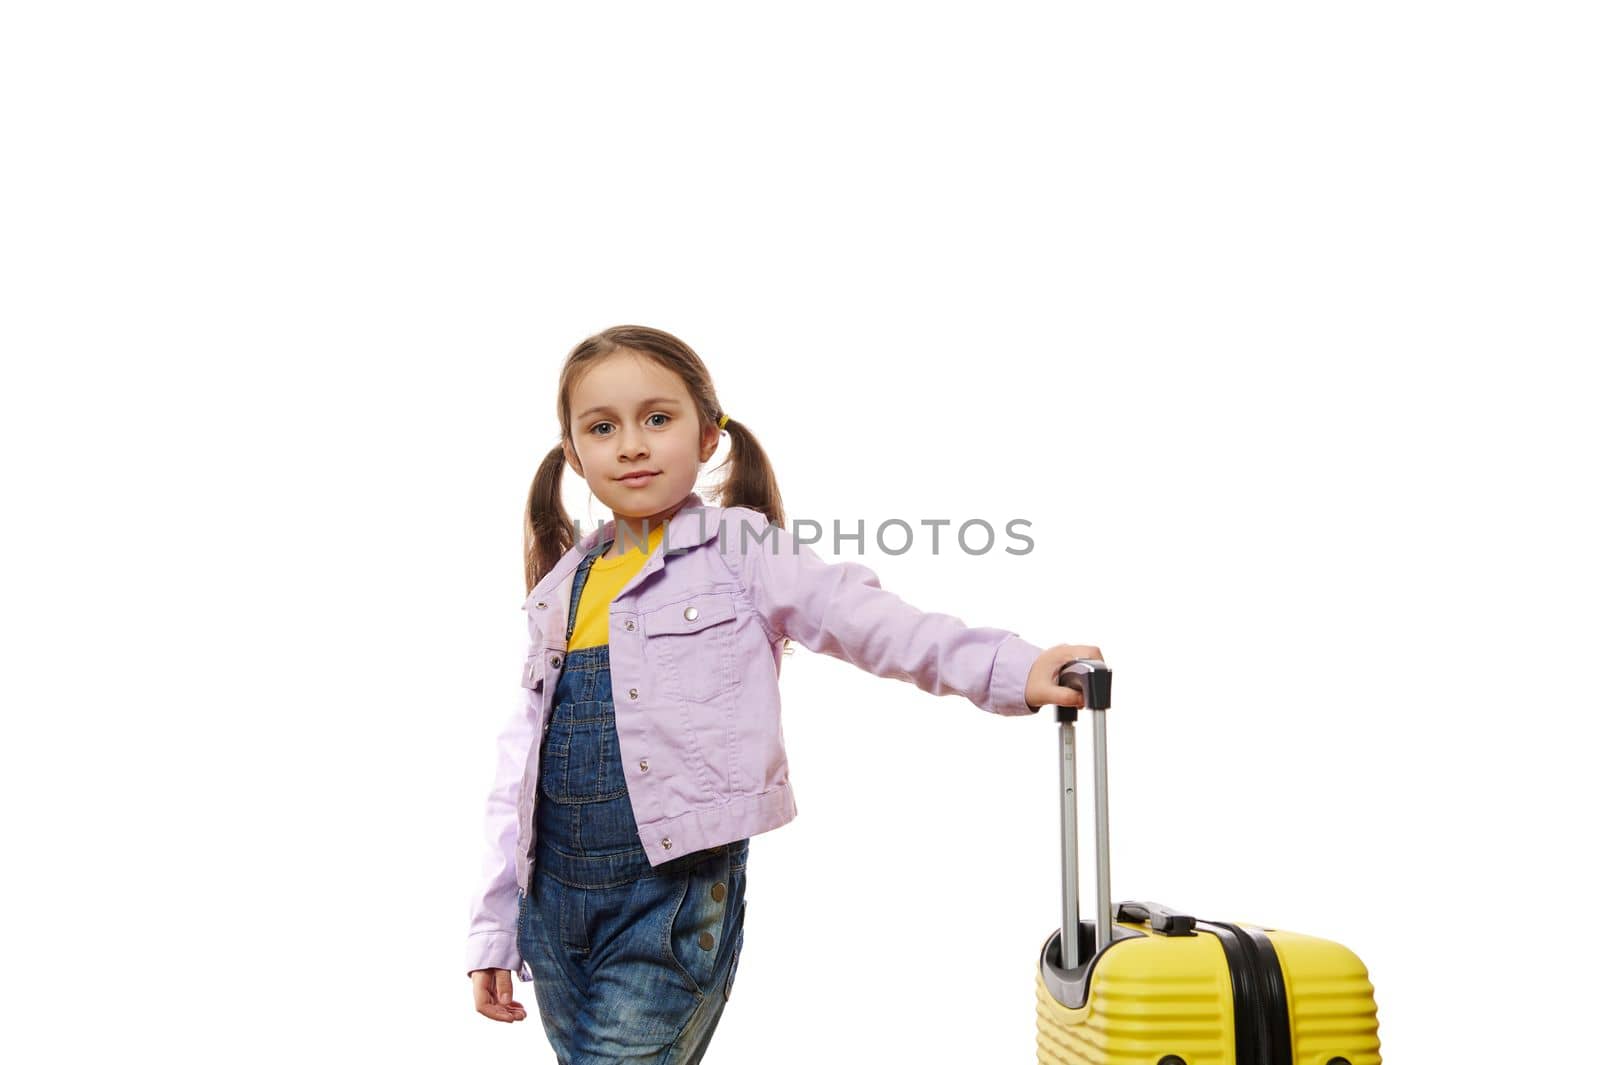 Caucasian happy little child girl with two ponytails, in purple denim jacket, looks at camera, posing with yellow suitcase over white background with copy space for ad. Tourism. Kids travelling alone